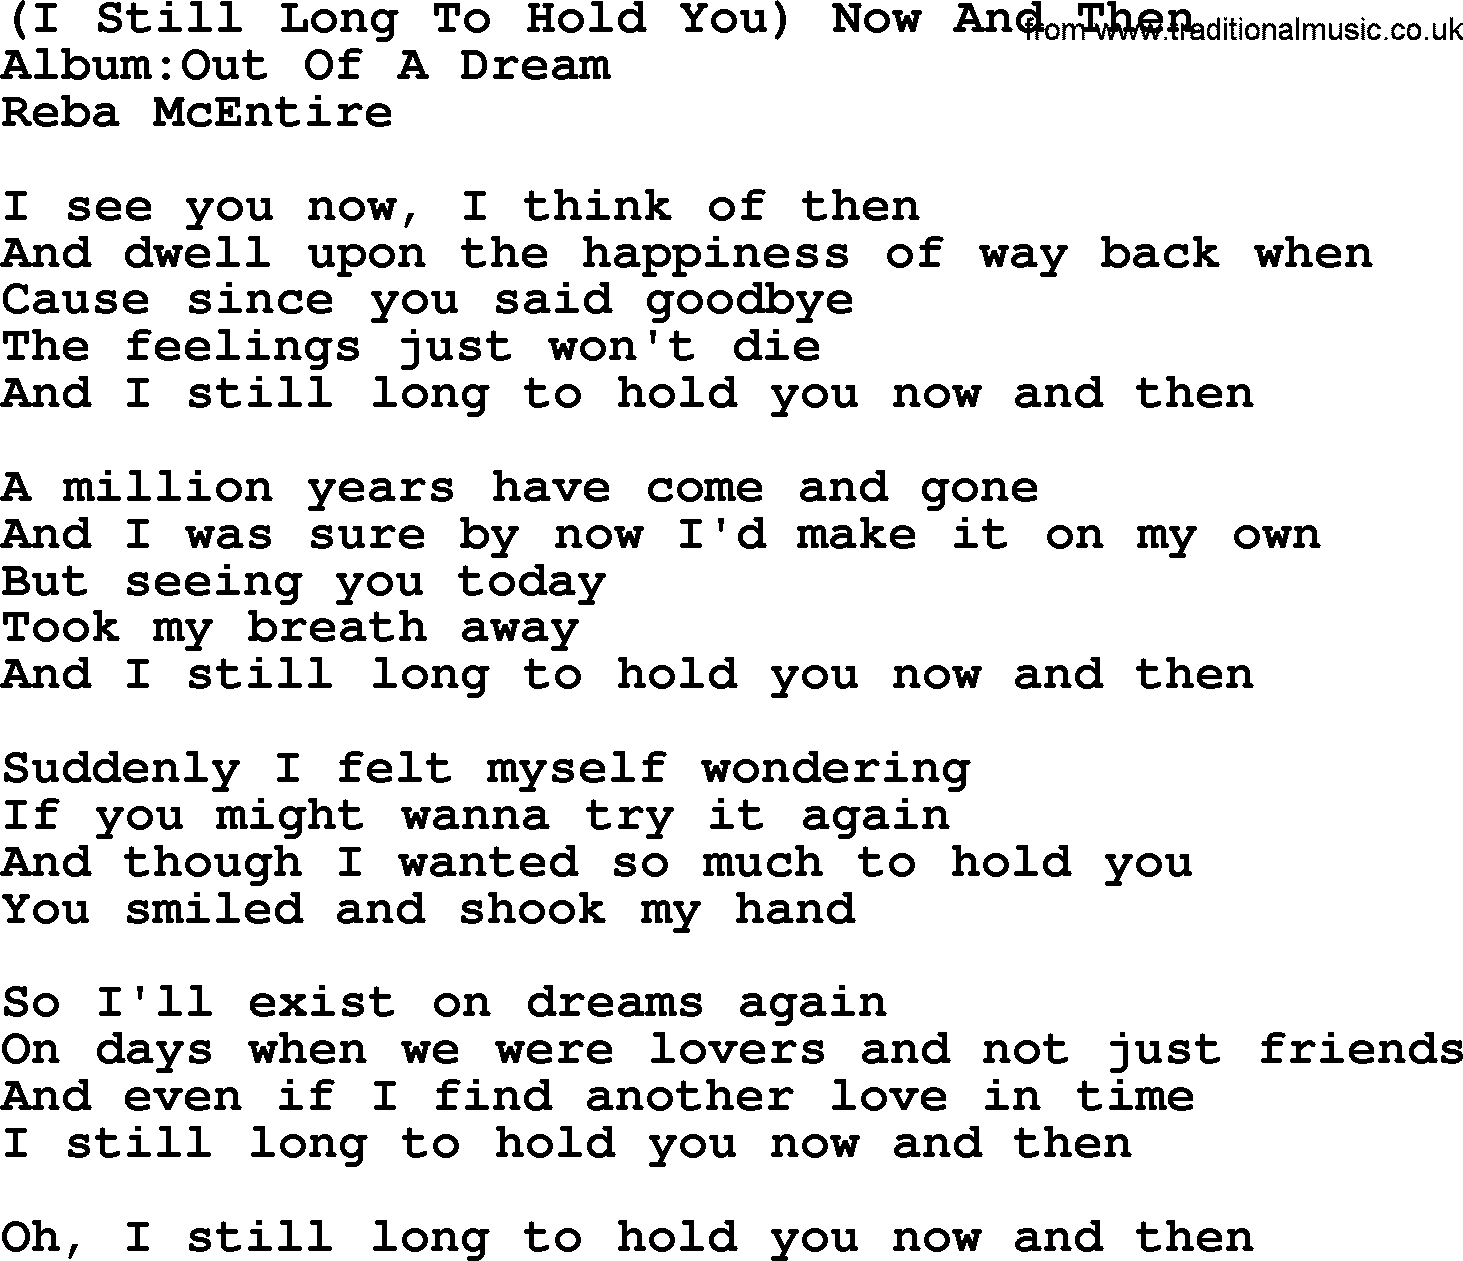 Reba McEntire song: I Still Long To Hold You Now And Then lyrics